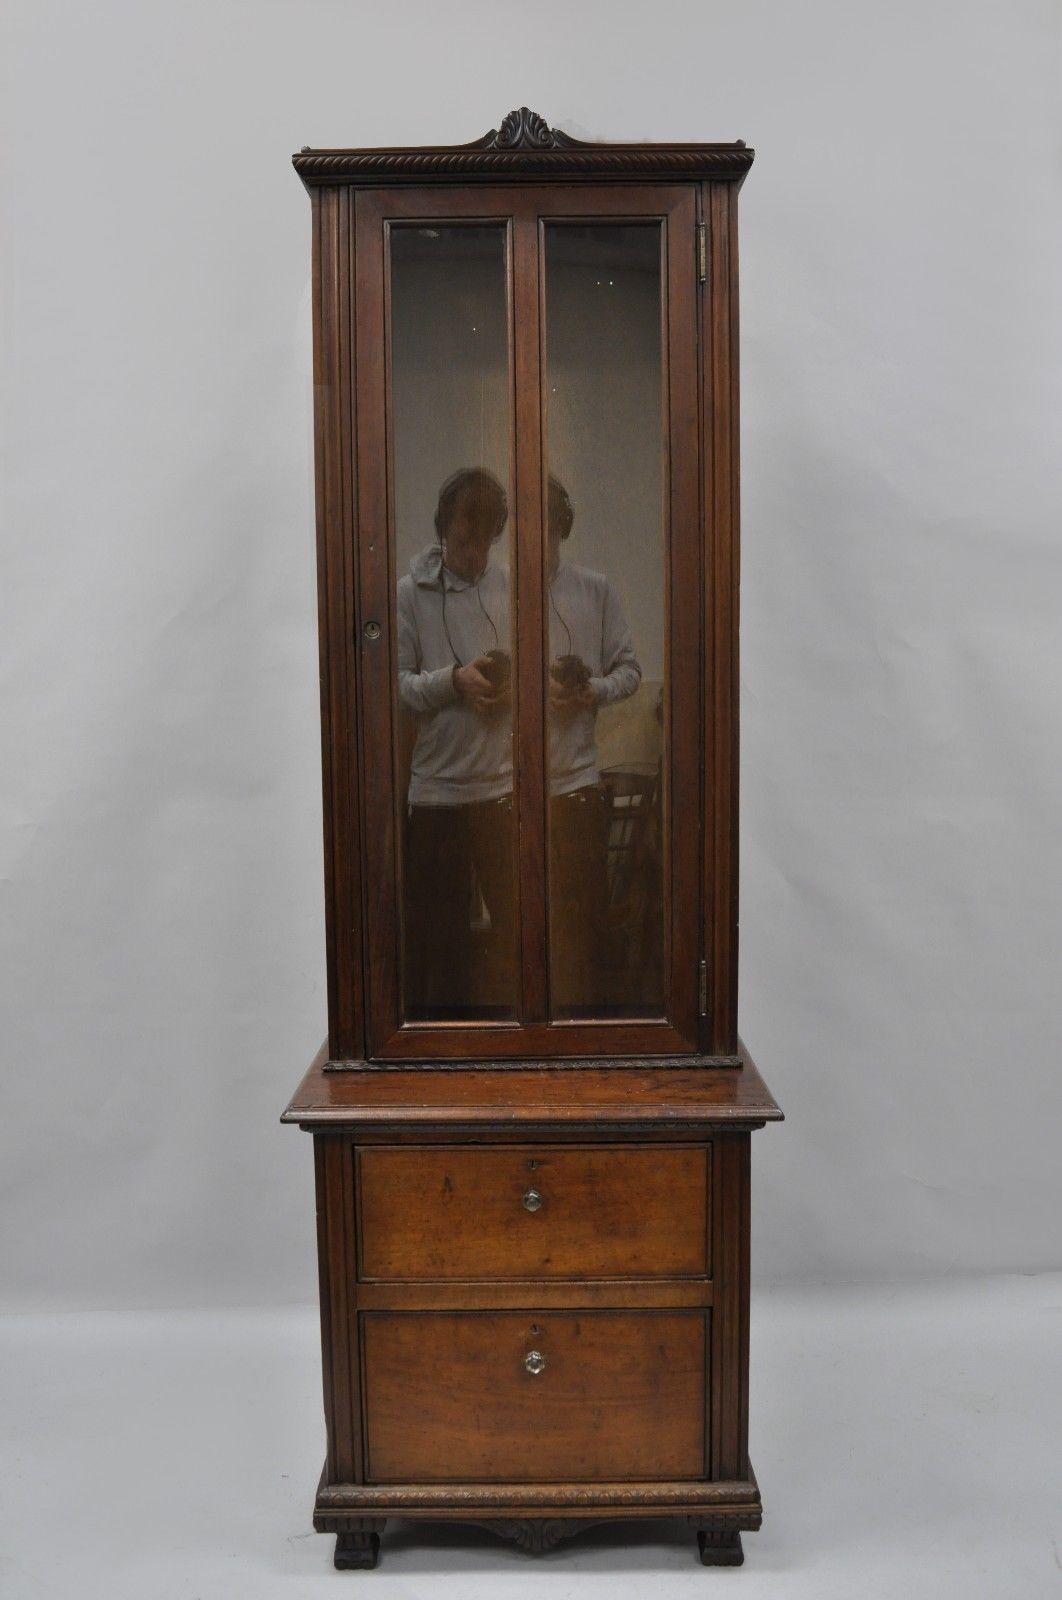 Antique narrow two-piece walnut gun cabinet. Item features solid two-piece construction, nicely carved details, one swing door with glass, two drawers, attractive aged patina to wood, glass pulls, unlocked and locks not in working order. Upper